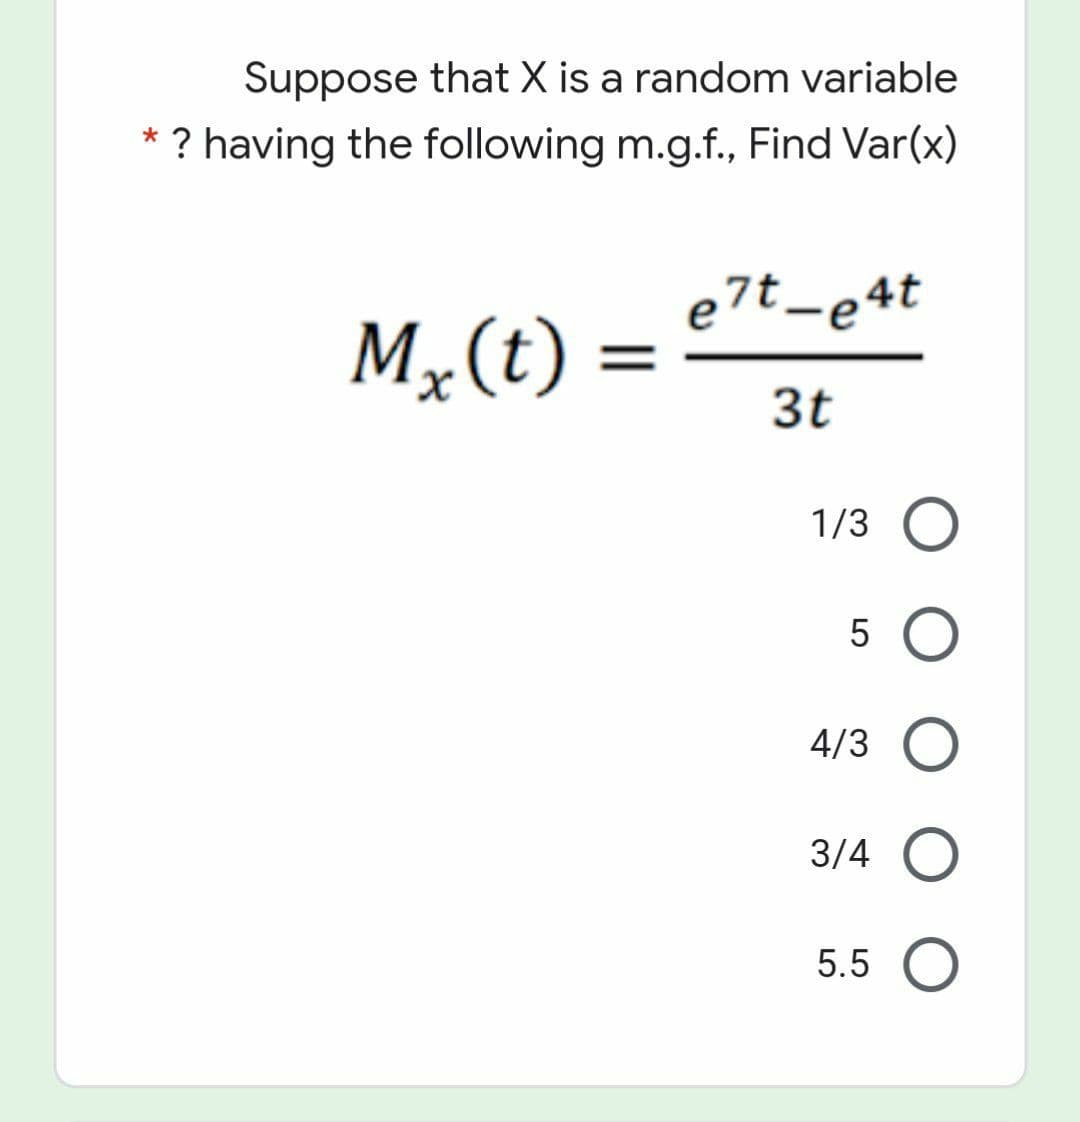 Suppose that X is a random variable
* ? having the following m.g.f., Find Var(x)
e7t_e4t
Mx(t)
3t
1/3 O
5 O
4/3 O
3/4 O
5.5 O
